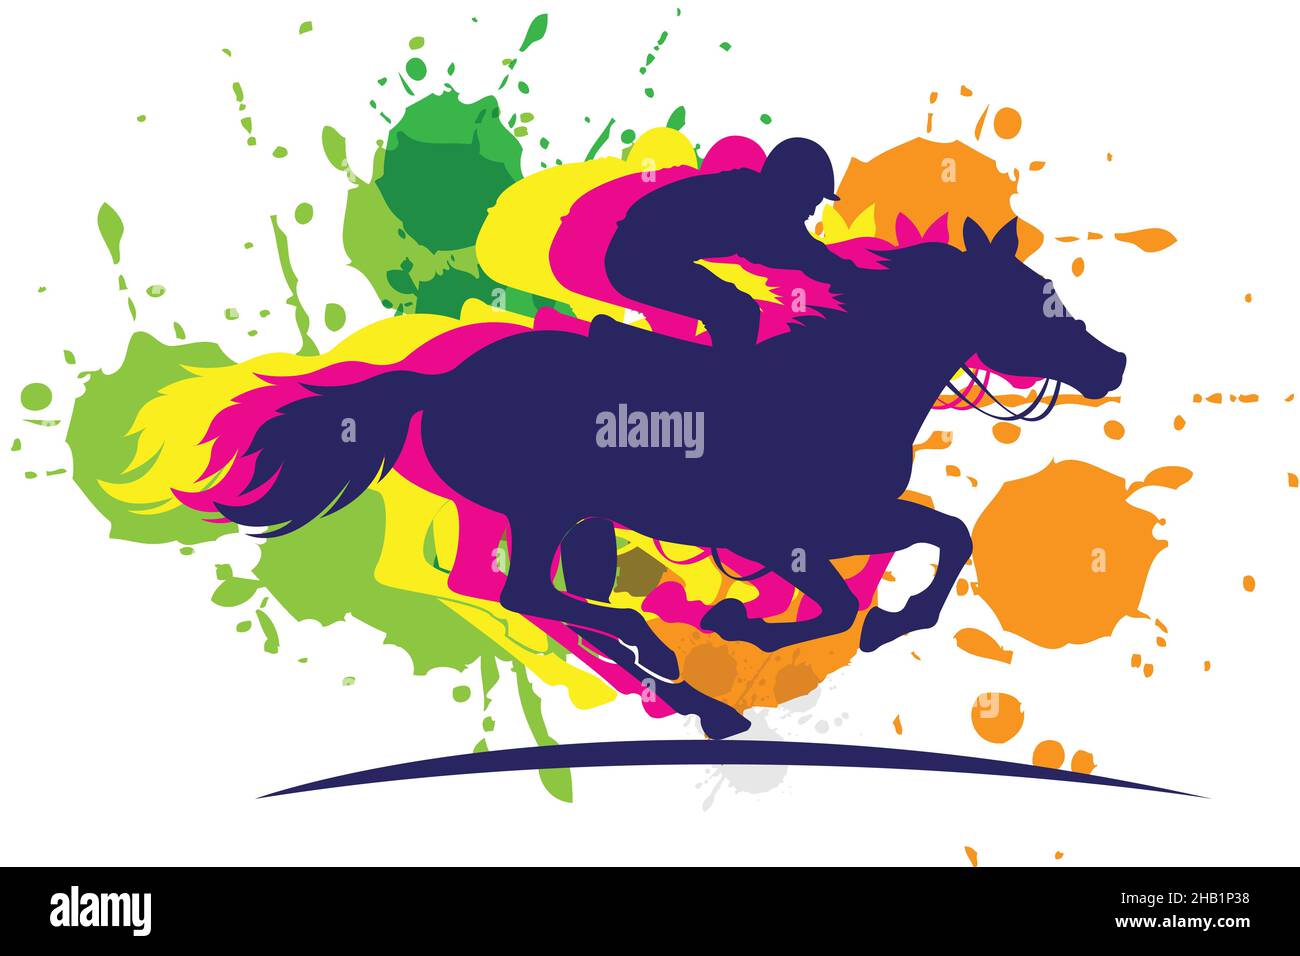 Vector illustration of race horse with jockey. black isolated silhouette on light gray background. Equestrian competition logo. Stock Vector